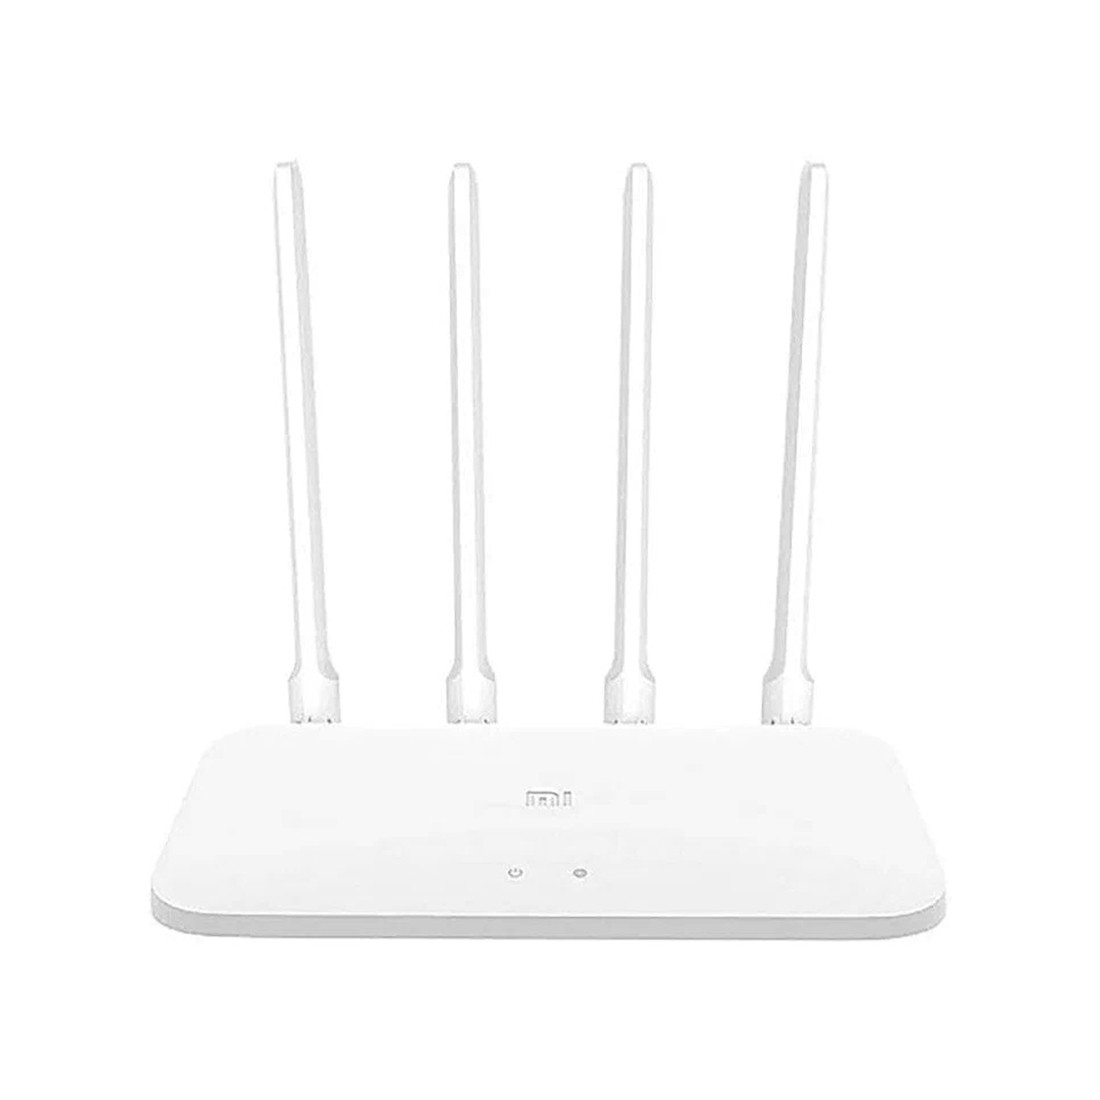 Маршрутизатор Xiaomi Router AC1200 - фото 2 - id-p108631779